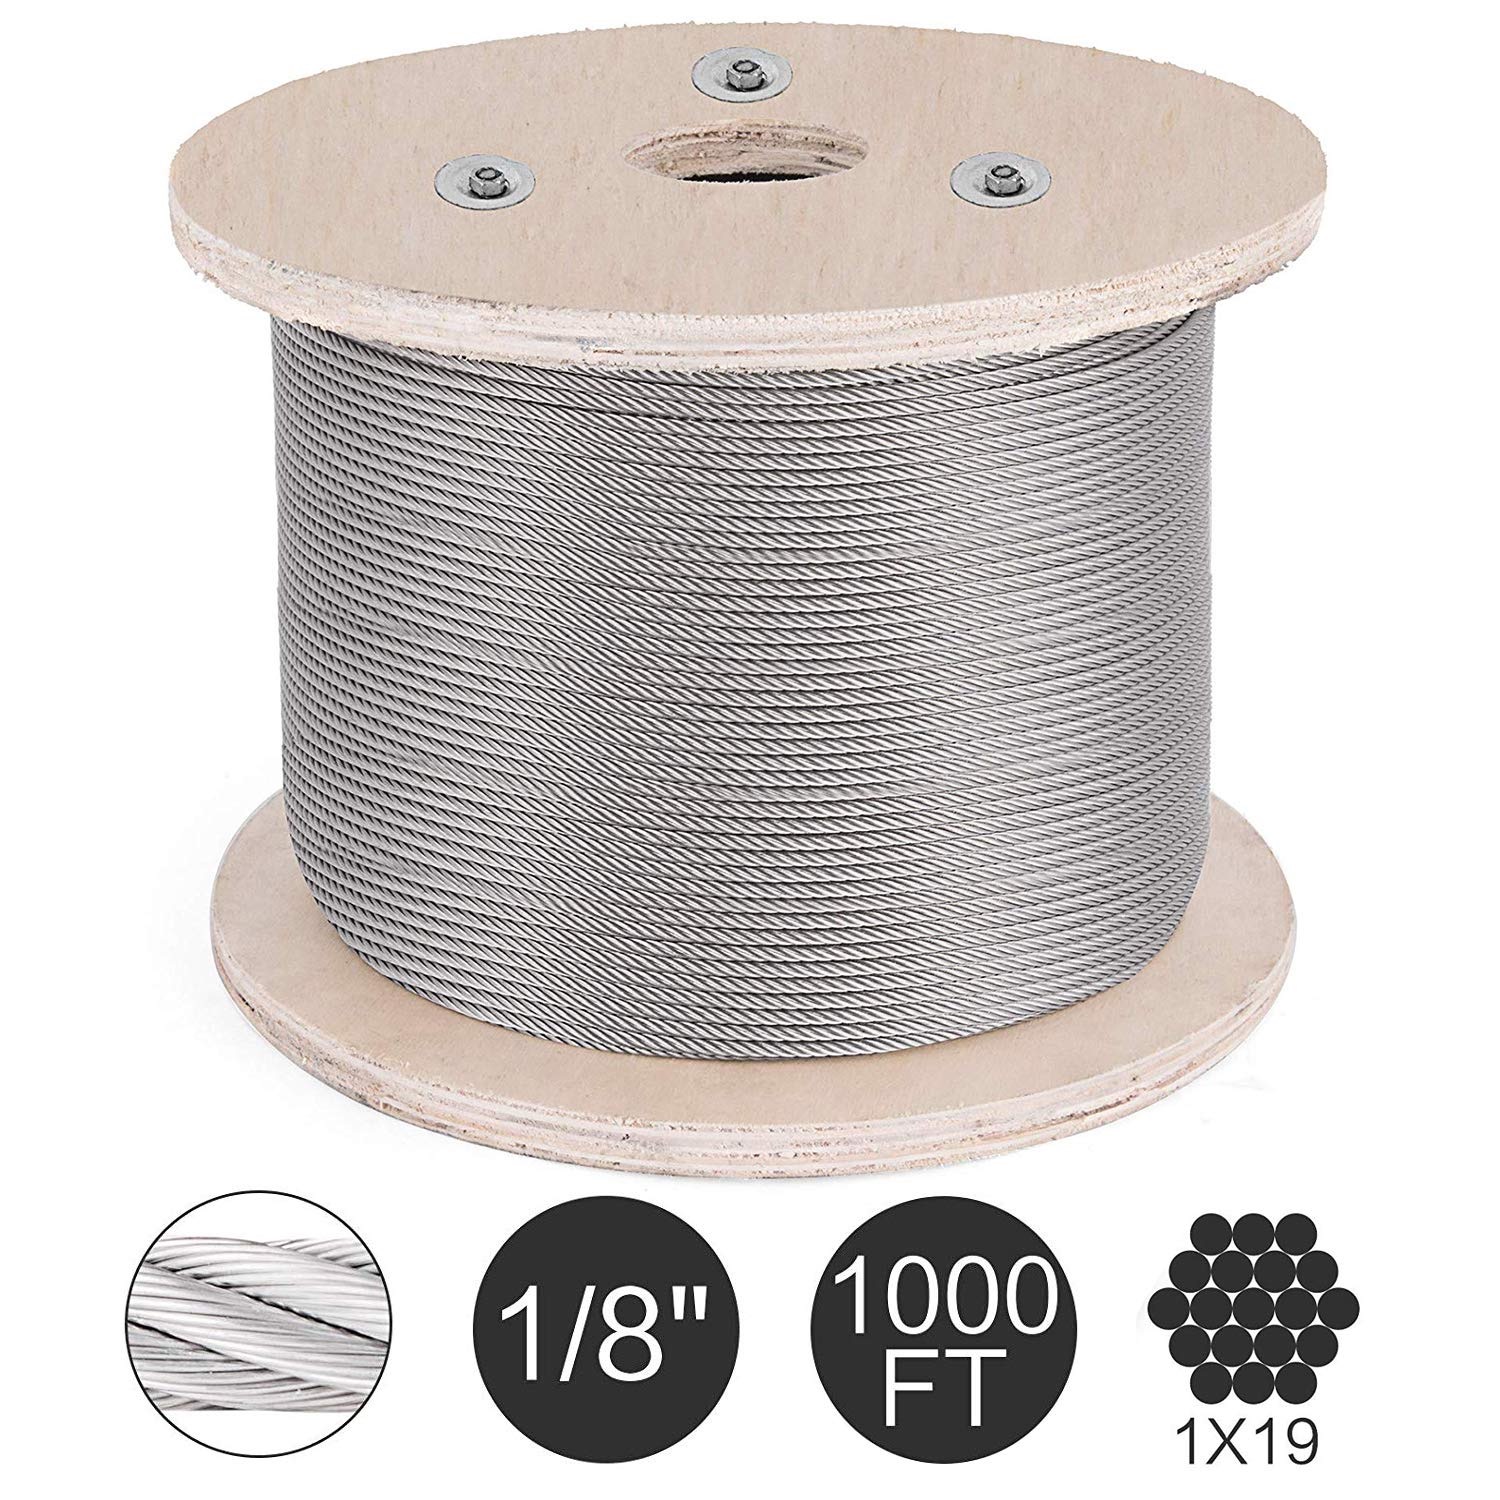 High Quality Galvanized Steel Wire Rope 3mm Diameter 7*19